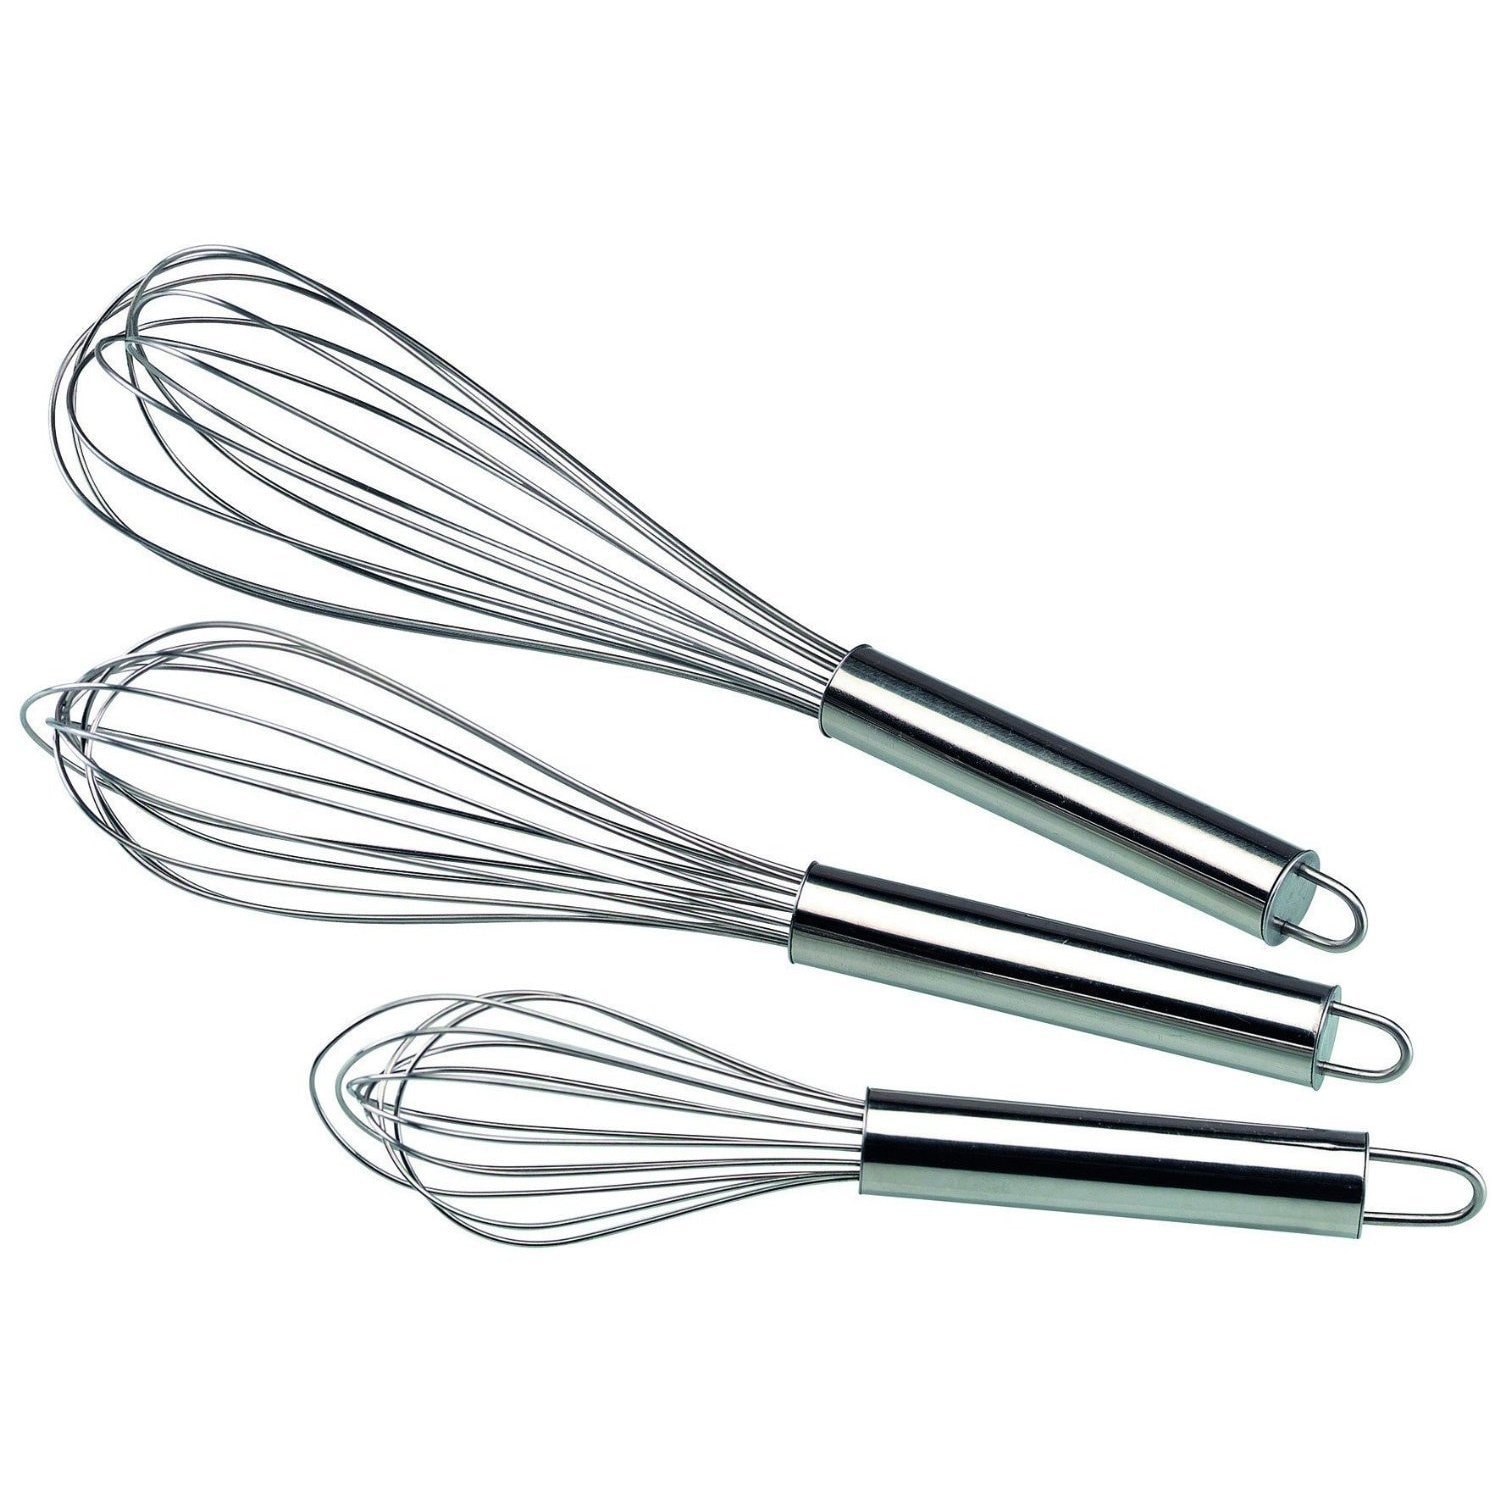 Z GRILLS Accessories Stainless Steel Hand Whisk Kitchen Baking Tool Set  3PCS